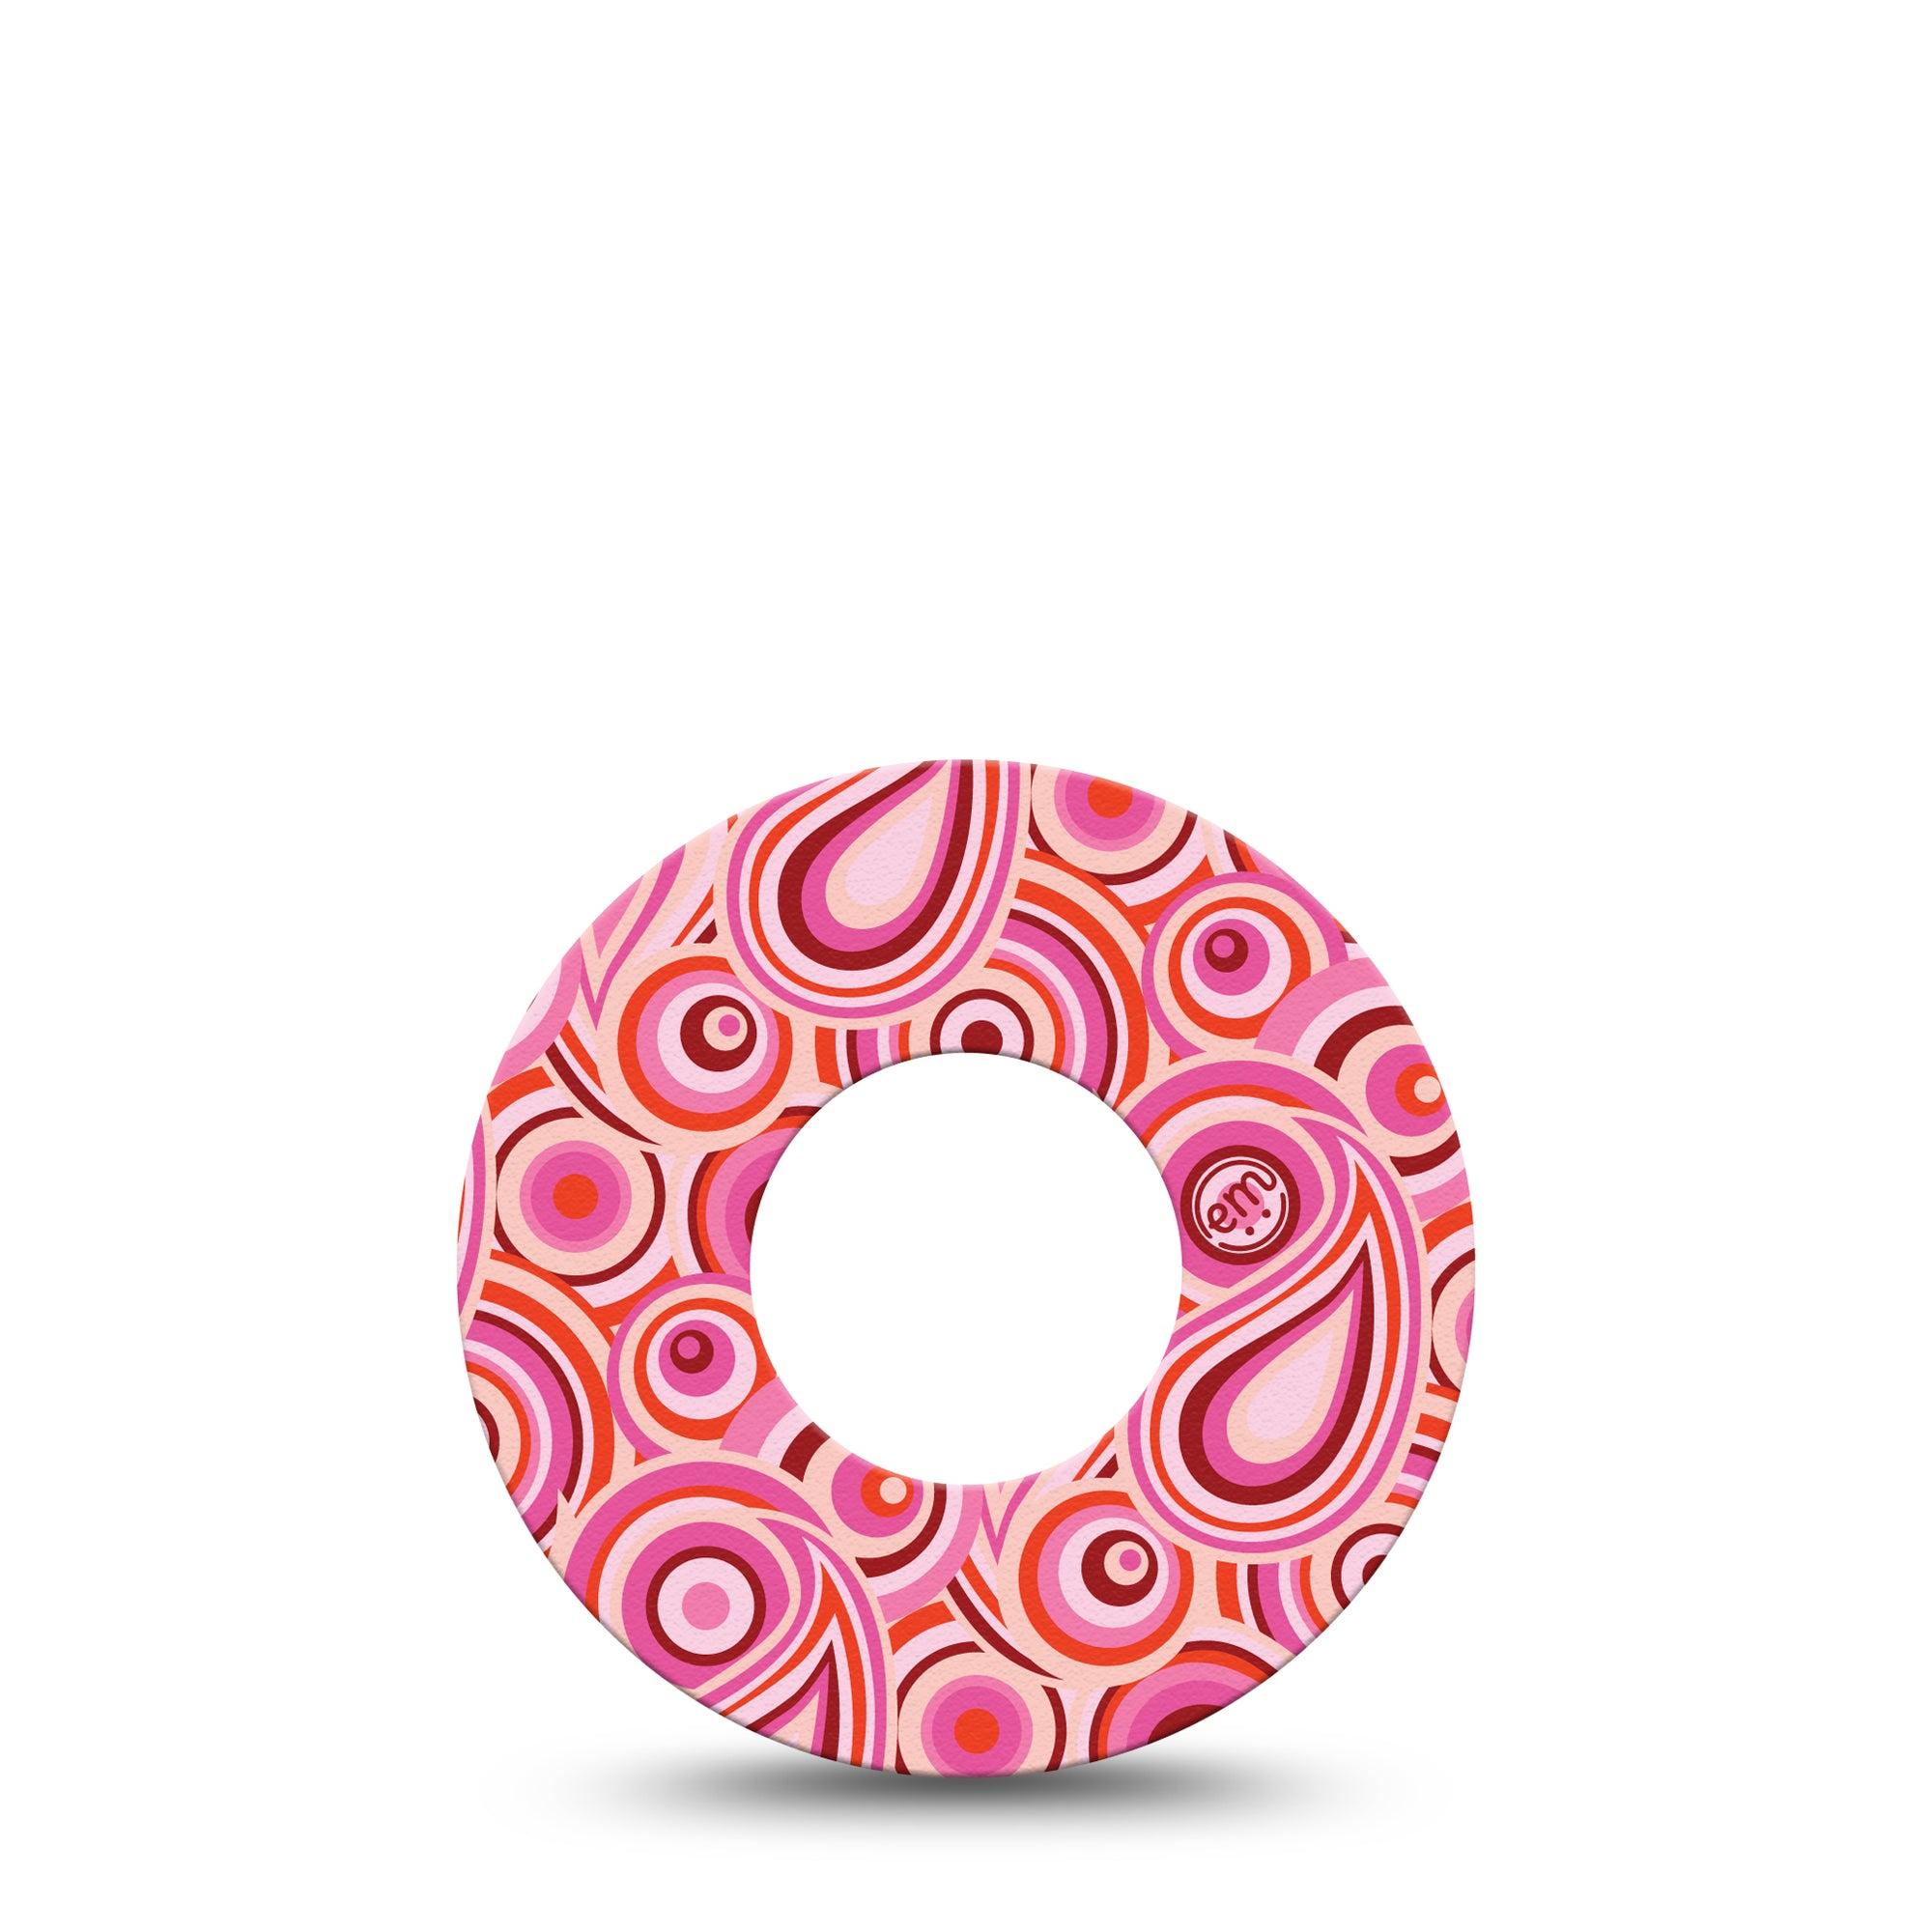 ExpressionMed BB Pink Party Libre Tape, Single, Pink Patterns Themed, CGM Adhesive Patch Design